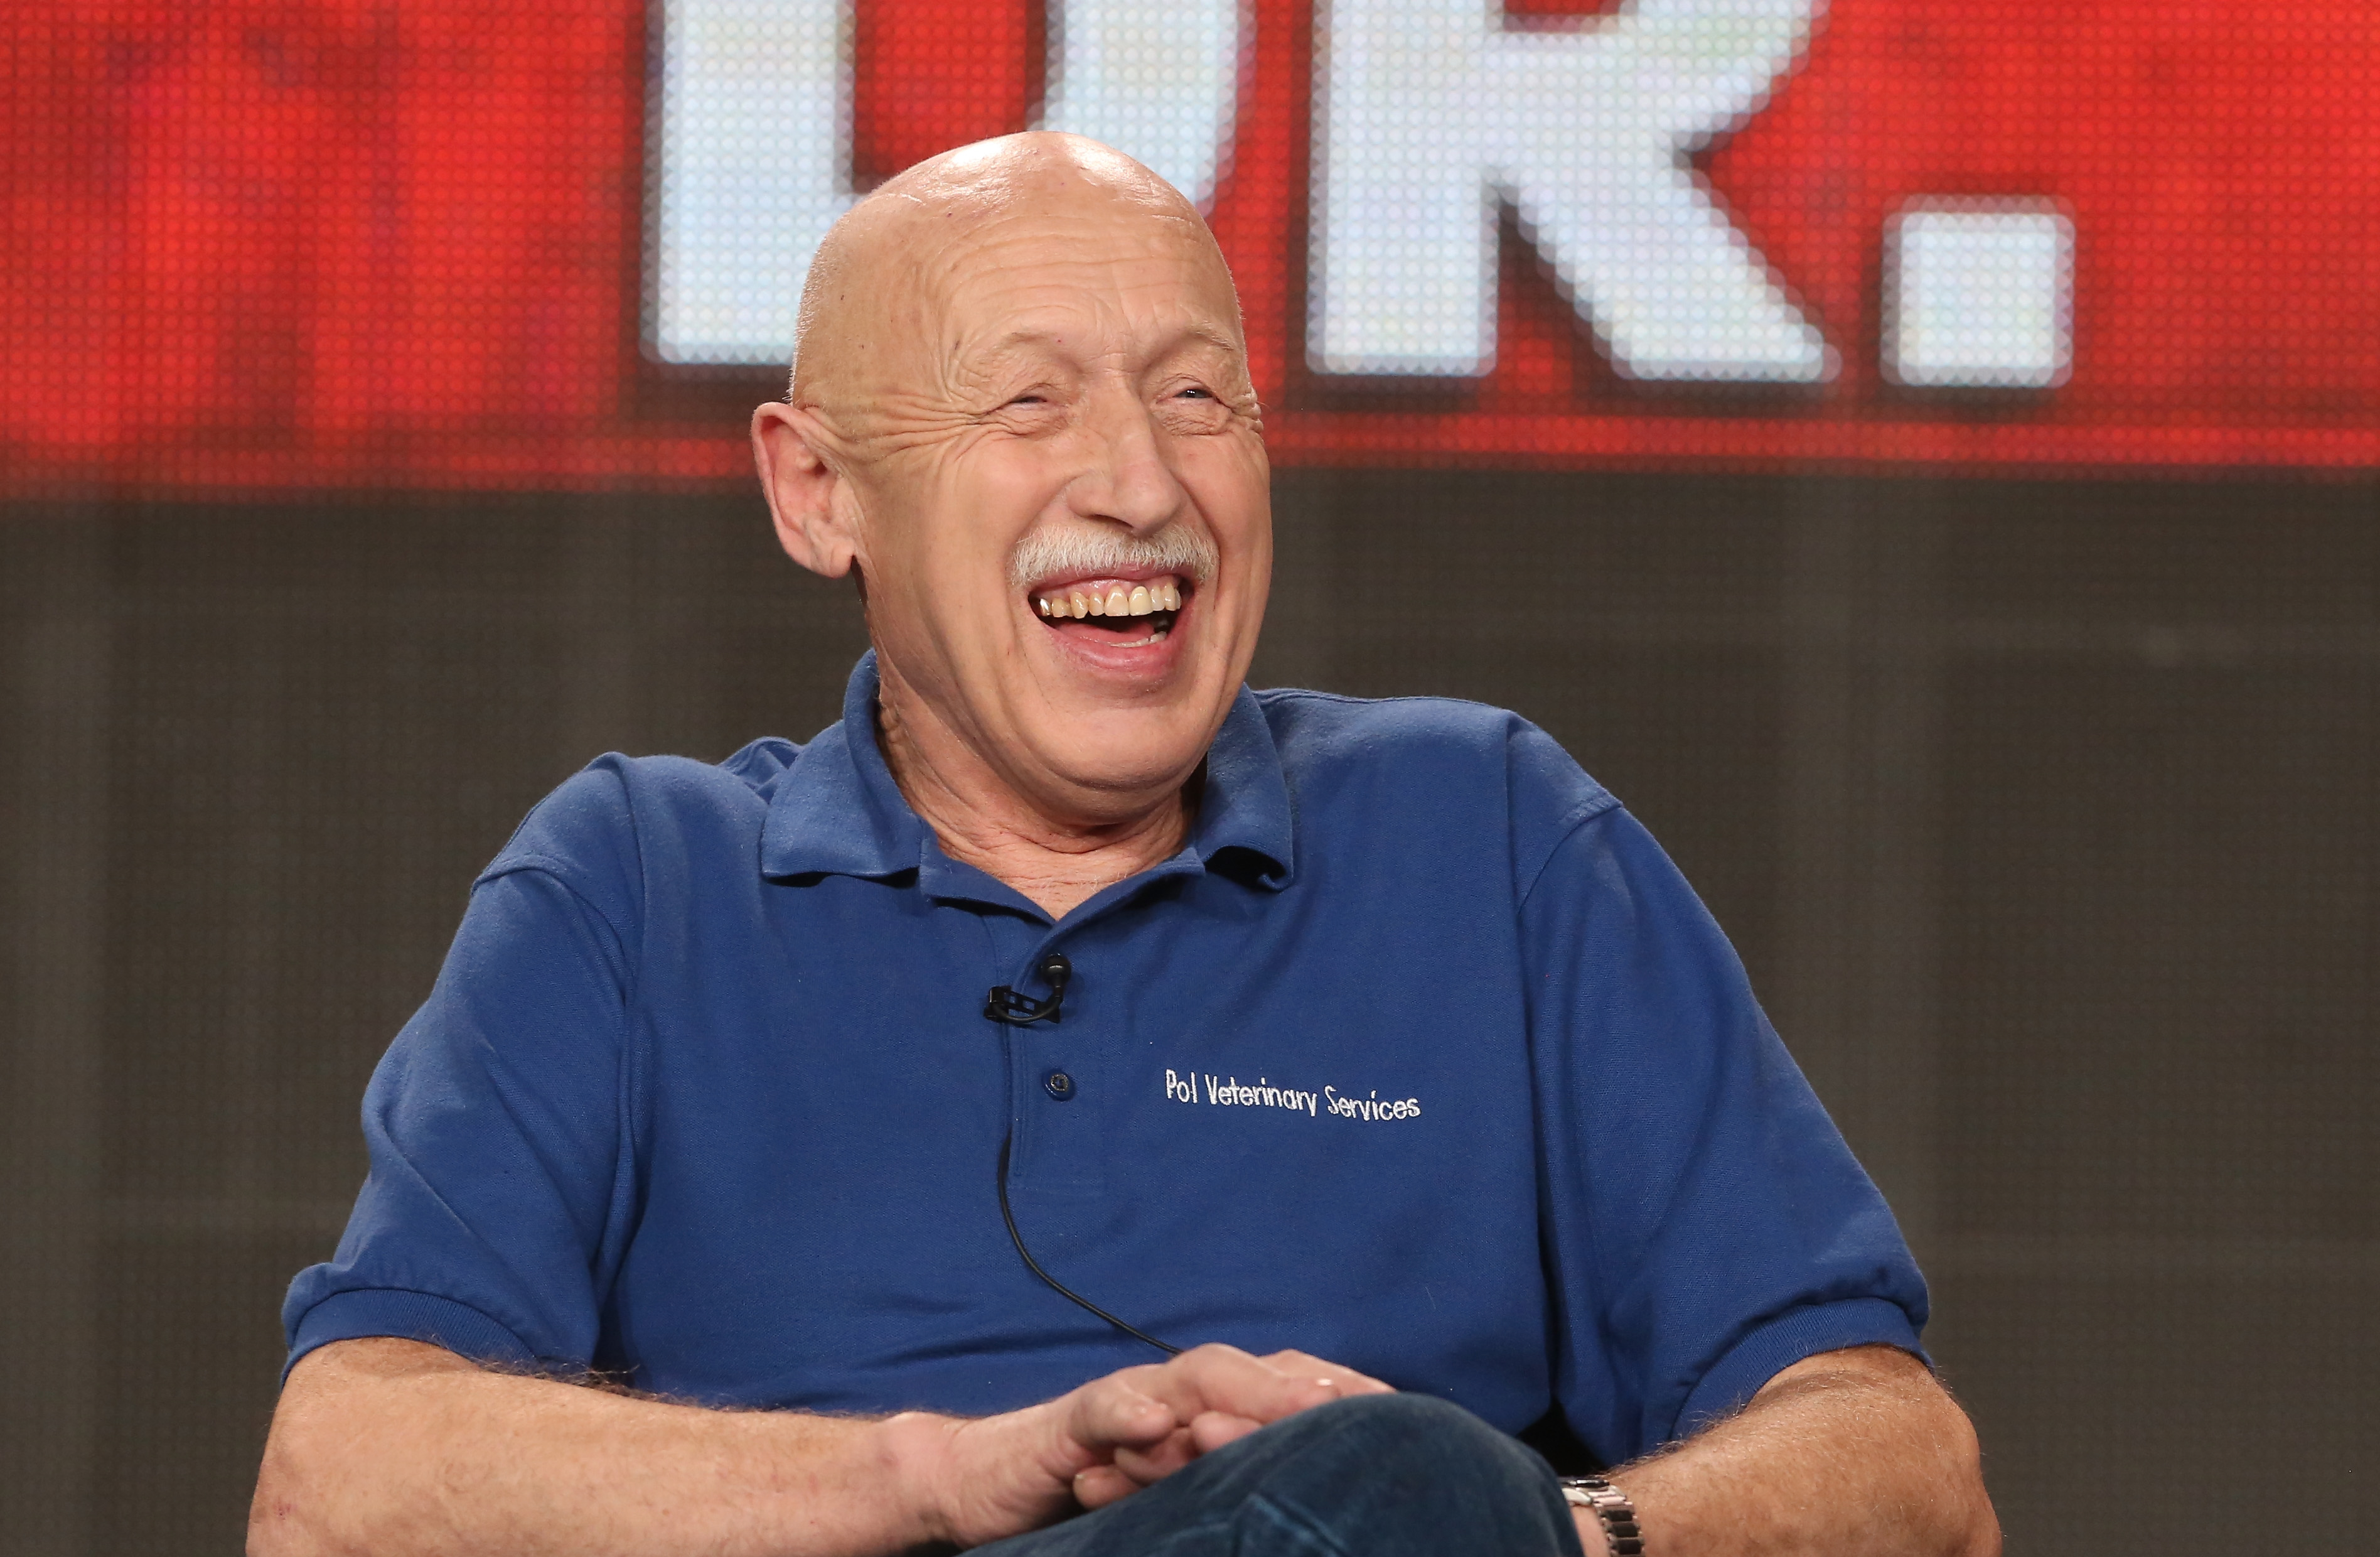 ‘The Incredible Dr. Pol’:   Why Many Veterinarians Find the Nat Geo Wild Show Controversial